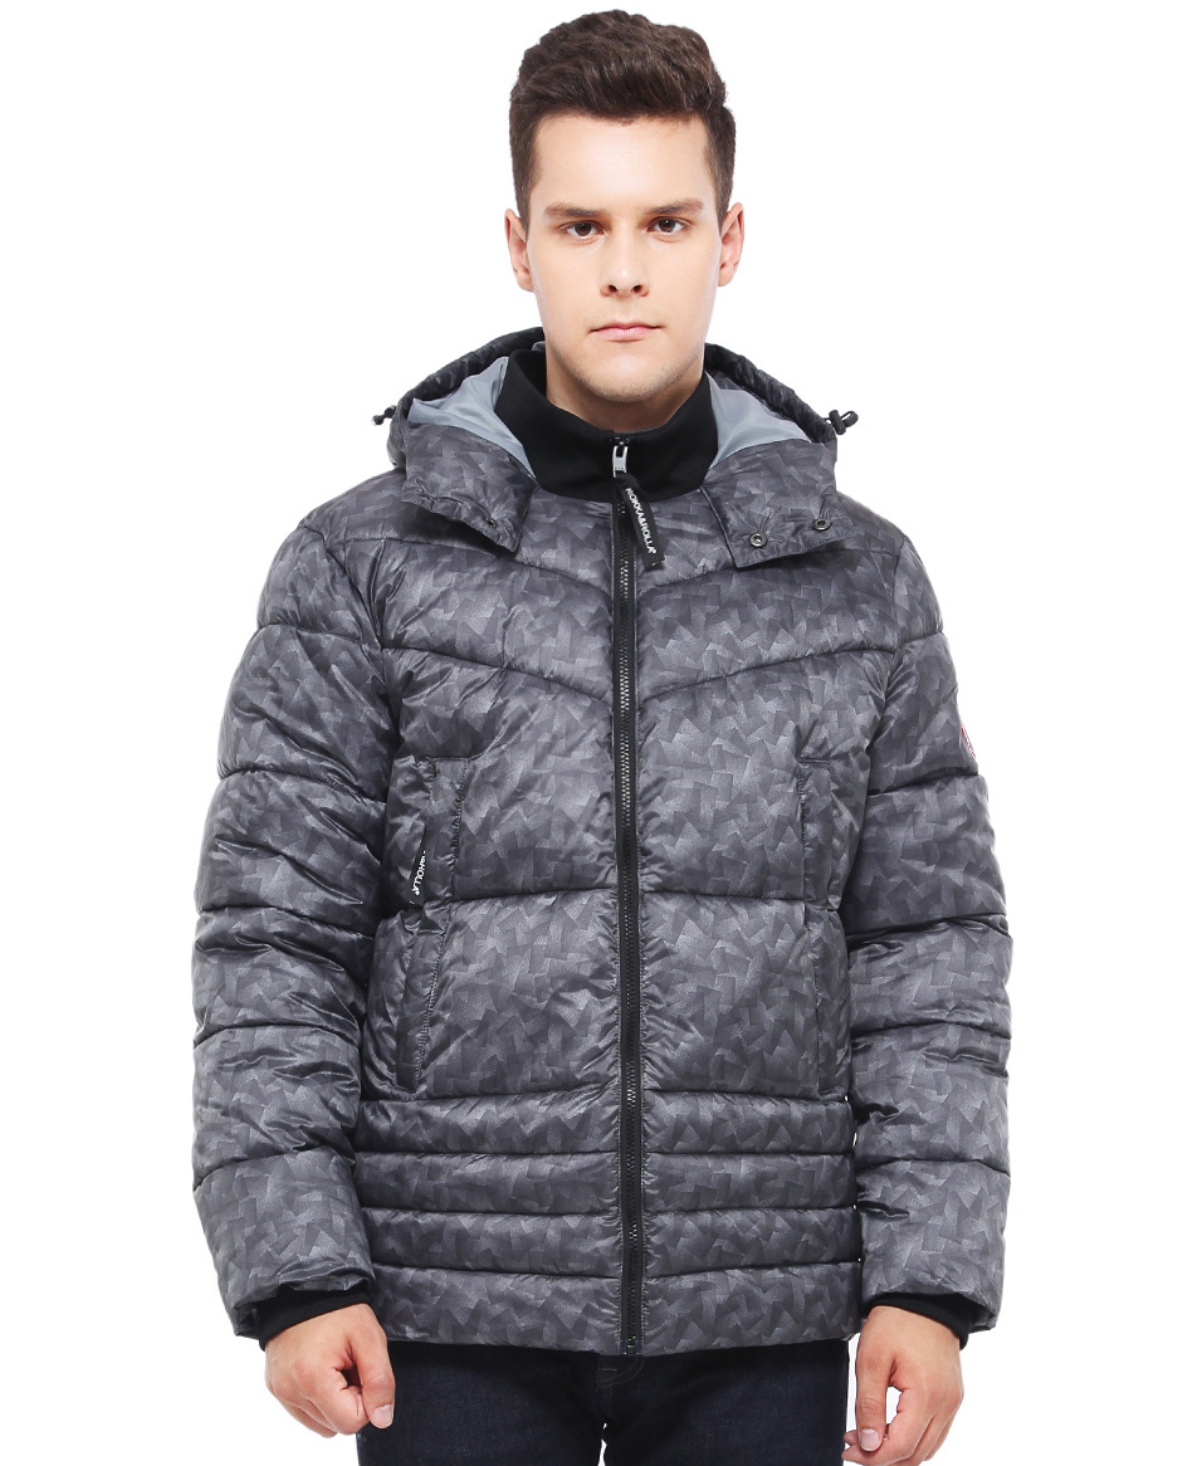 Men's Heavyweight Quilted Hooded Puffer Jacket Coat - Greystone geo